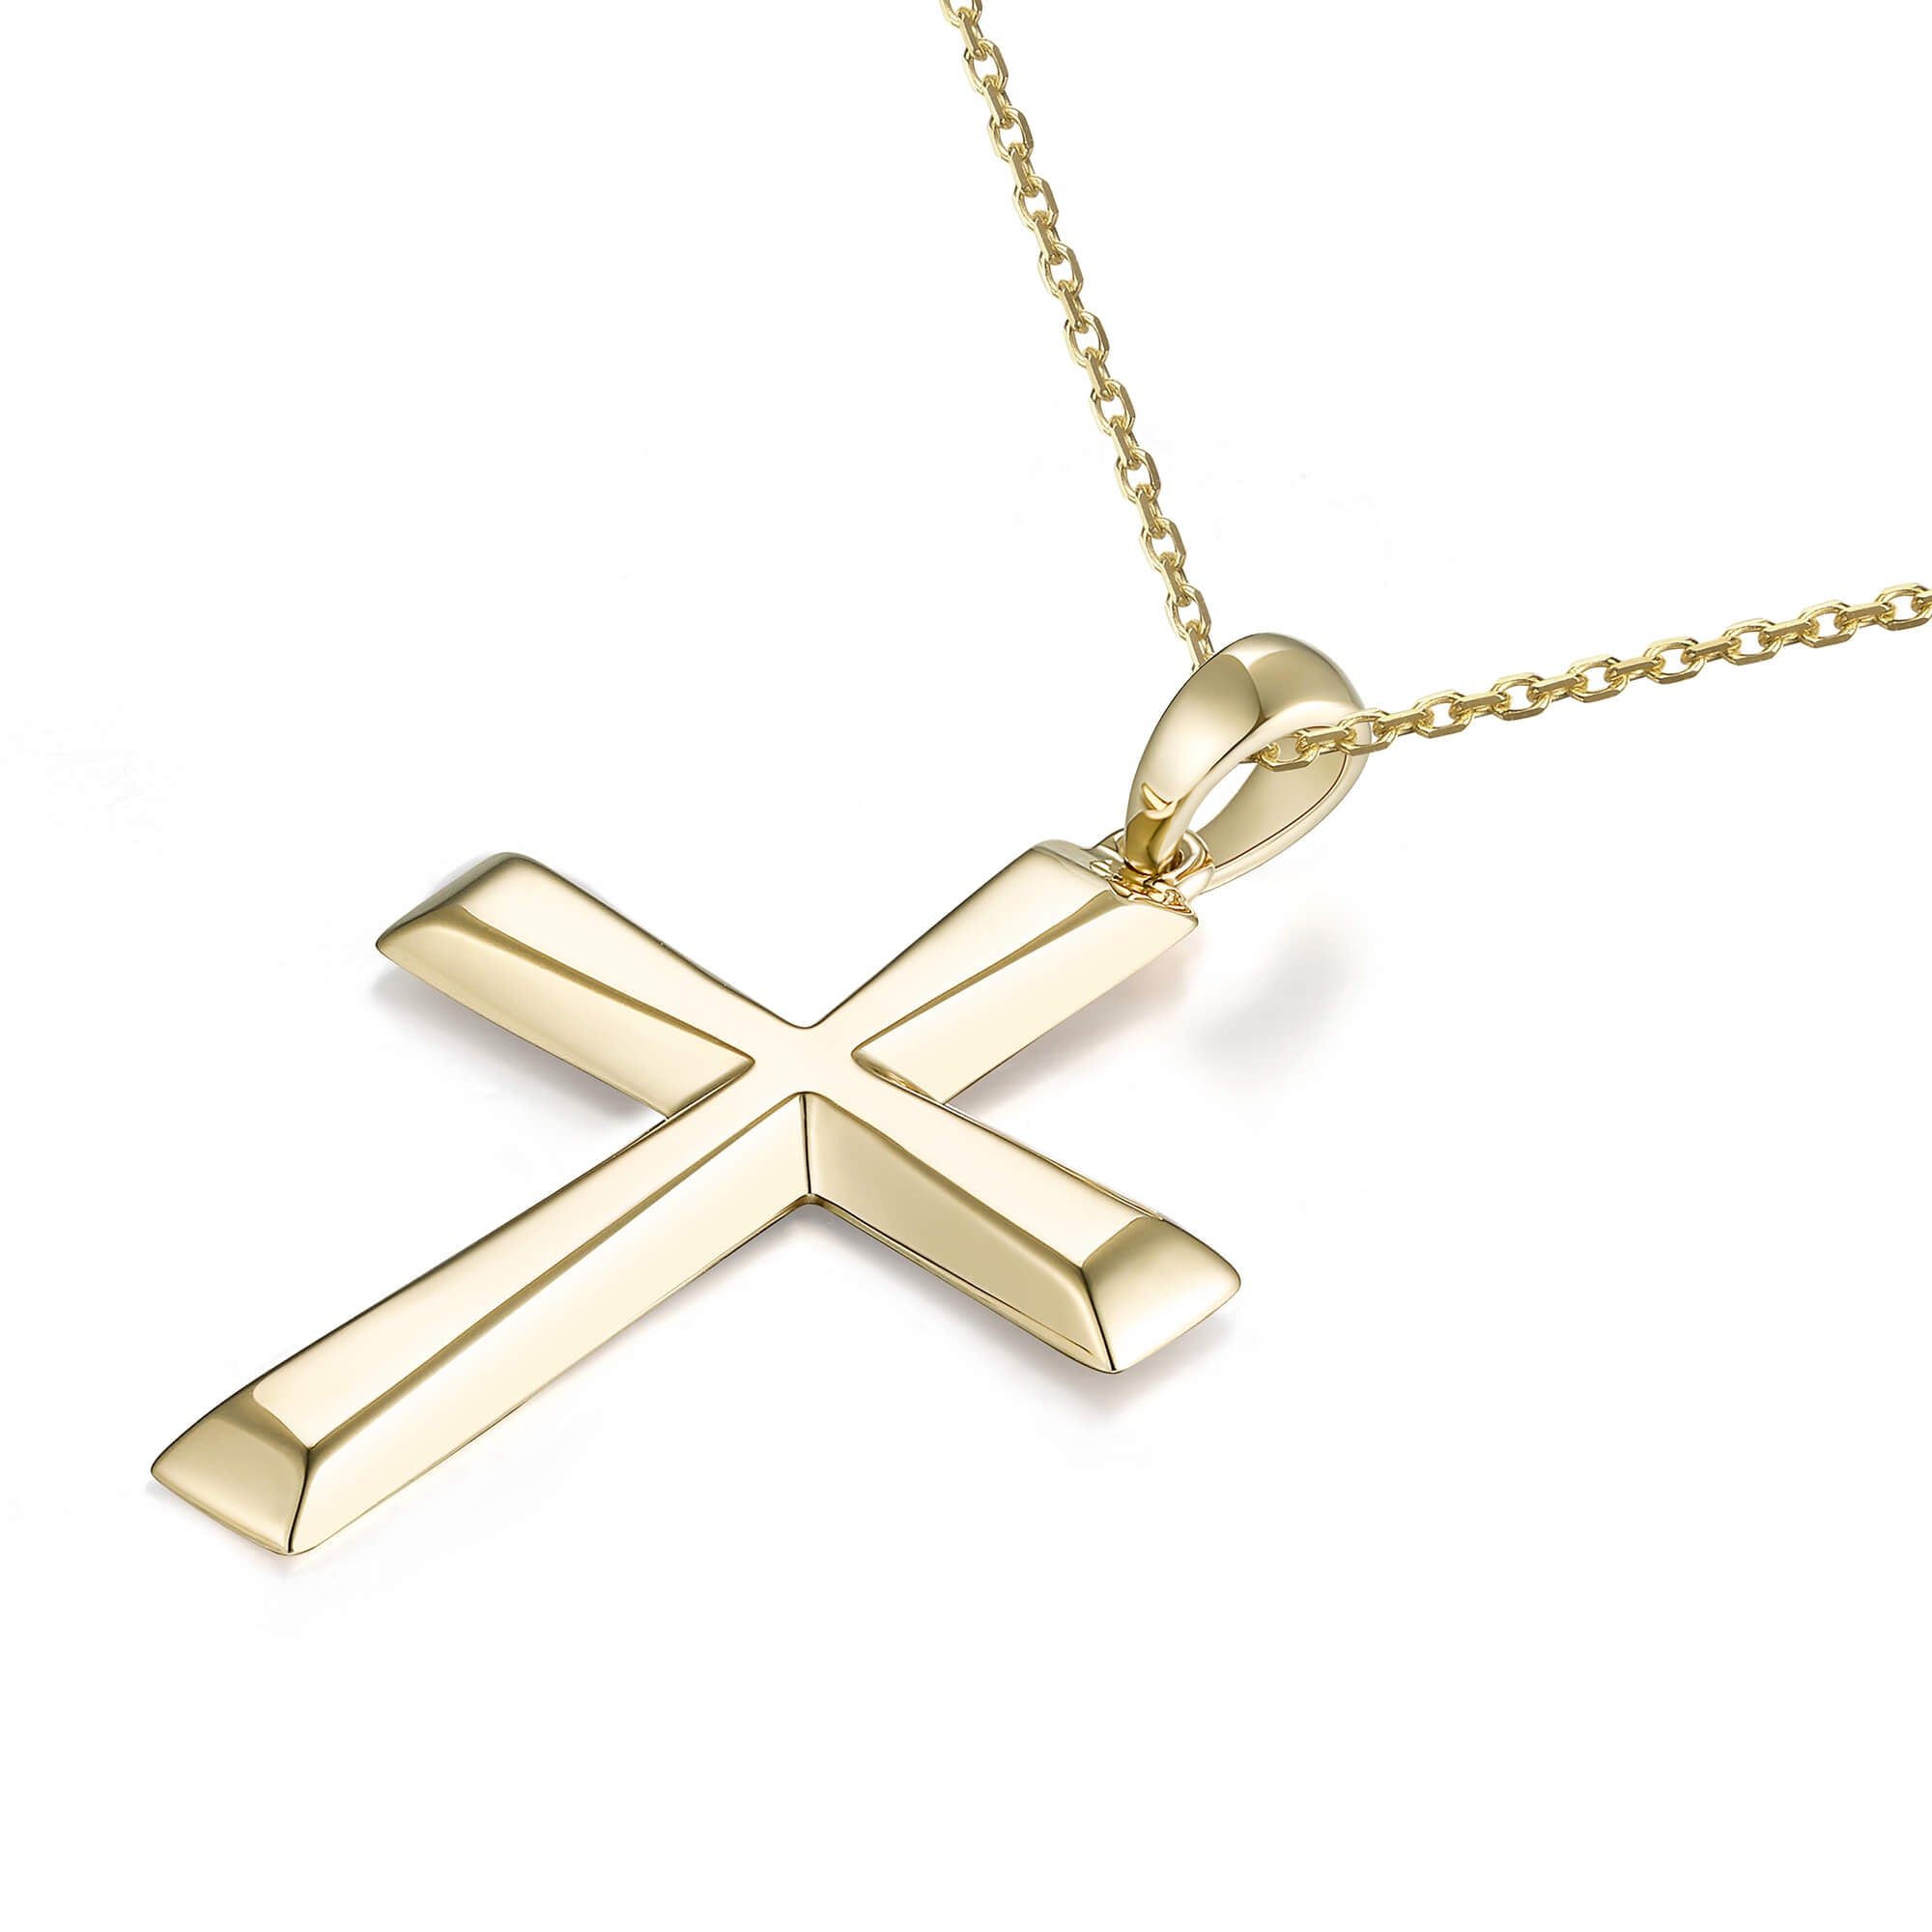 Crucifix Necklace - Cross Pendant Necklace In Two Tone